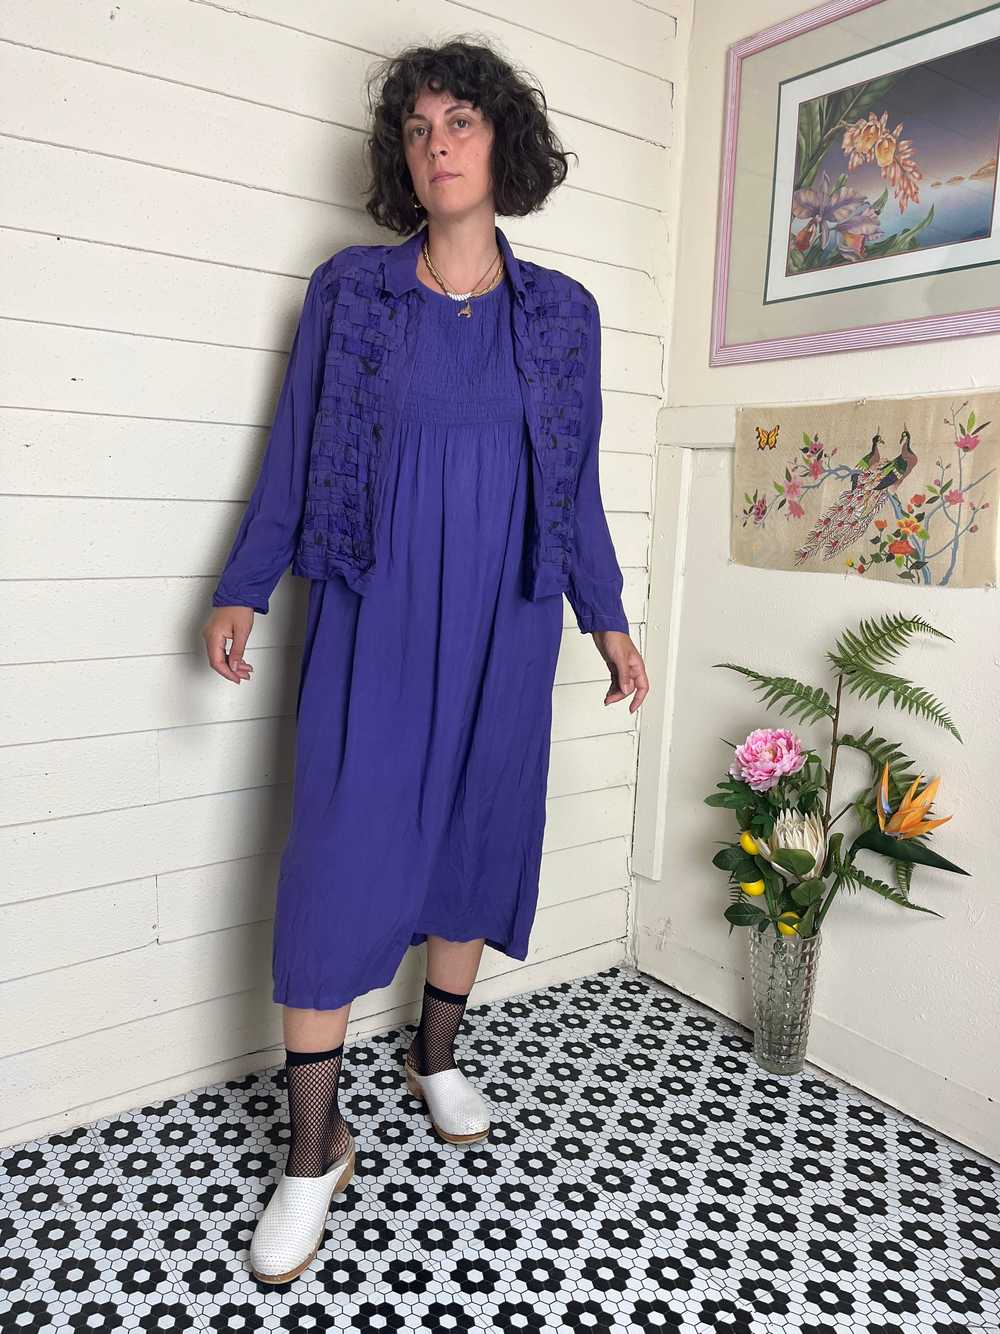 80s PURPLE DRESS AND QUILTED JACKET SET - image 1